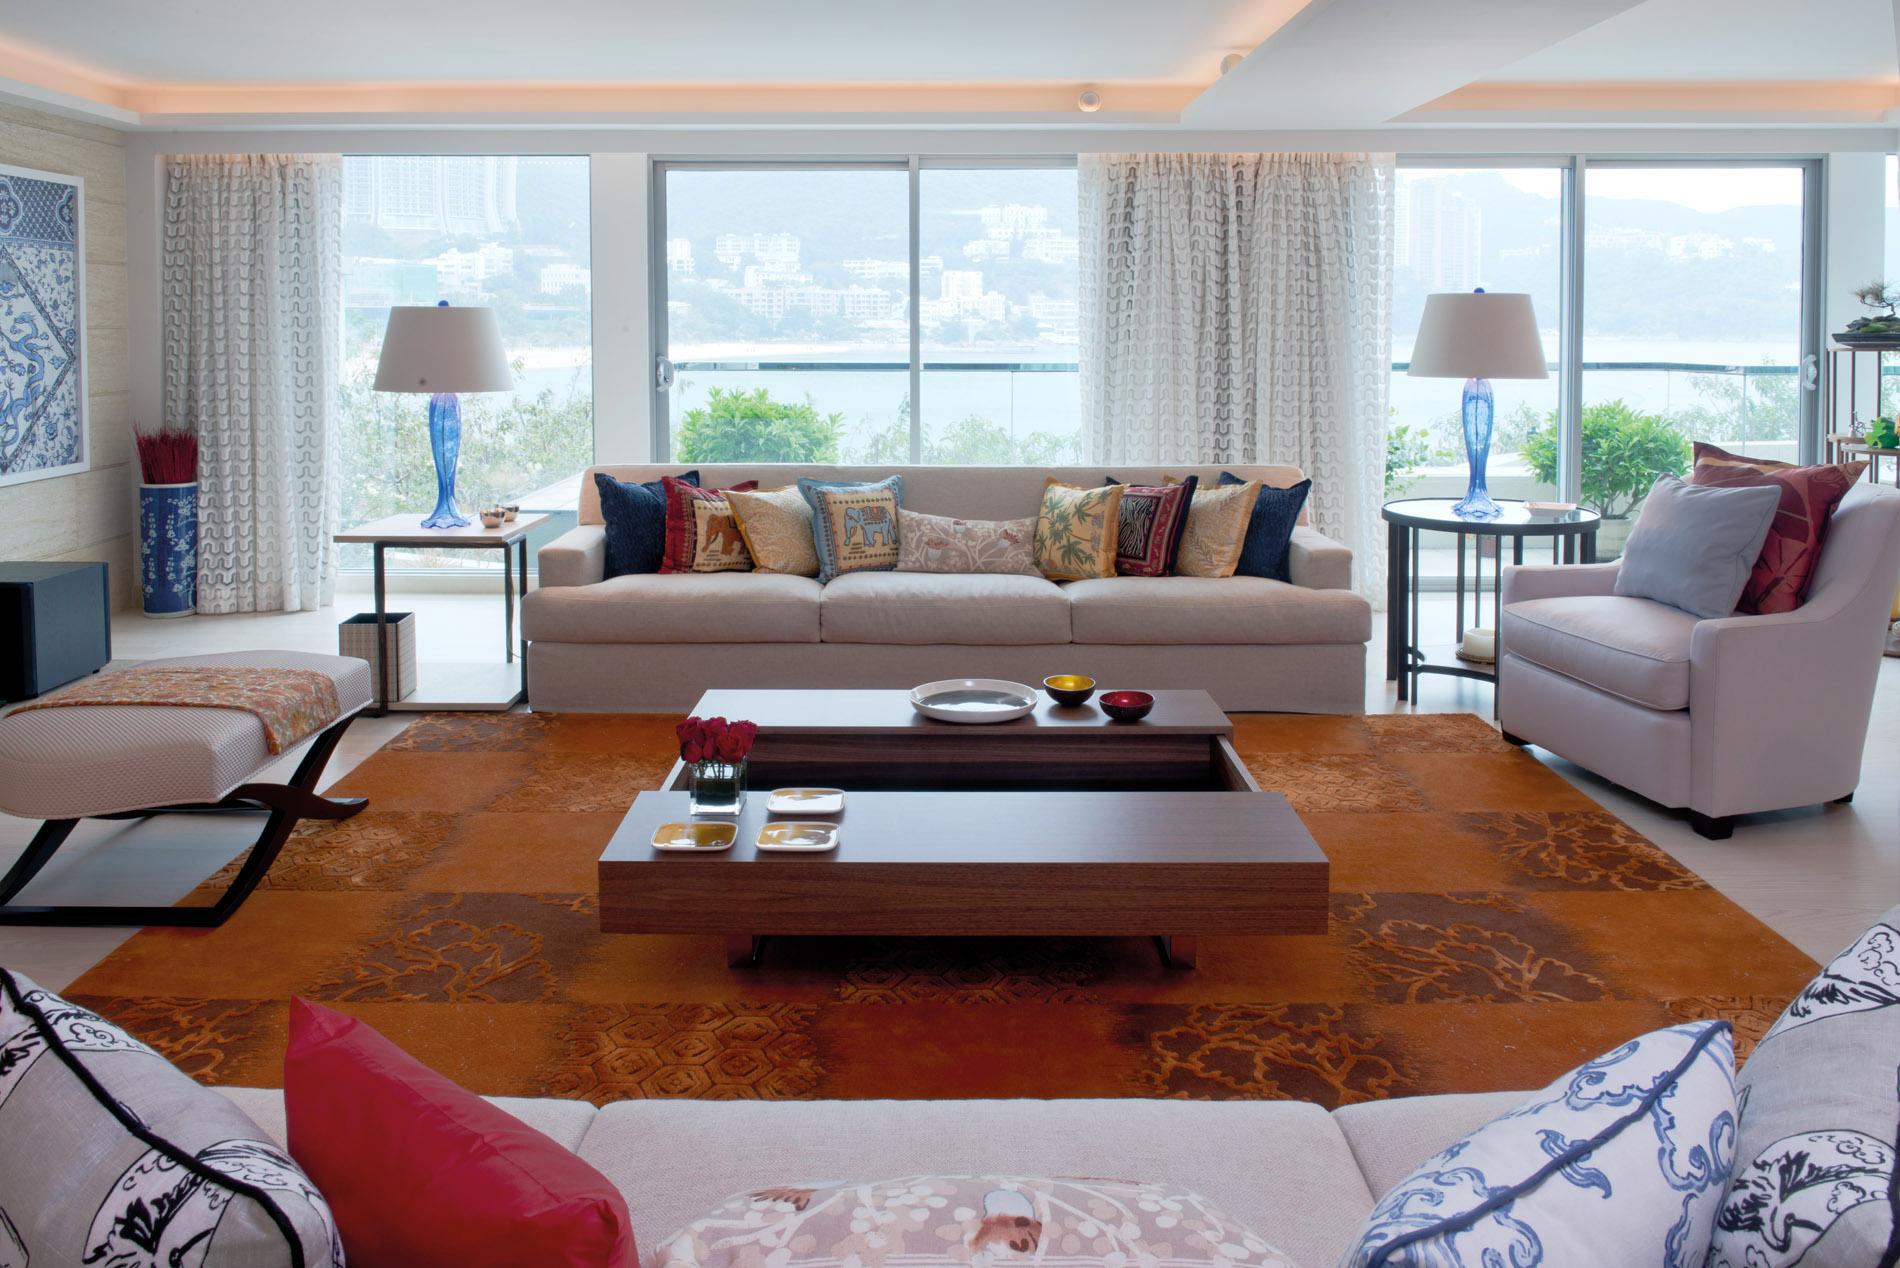 Making a Splash: A Colourful Repulse Bay Home Made for Entertaining